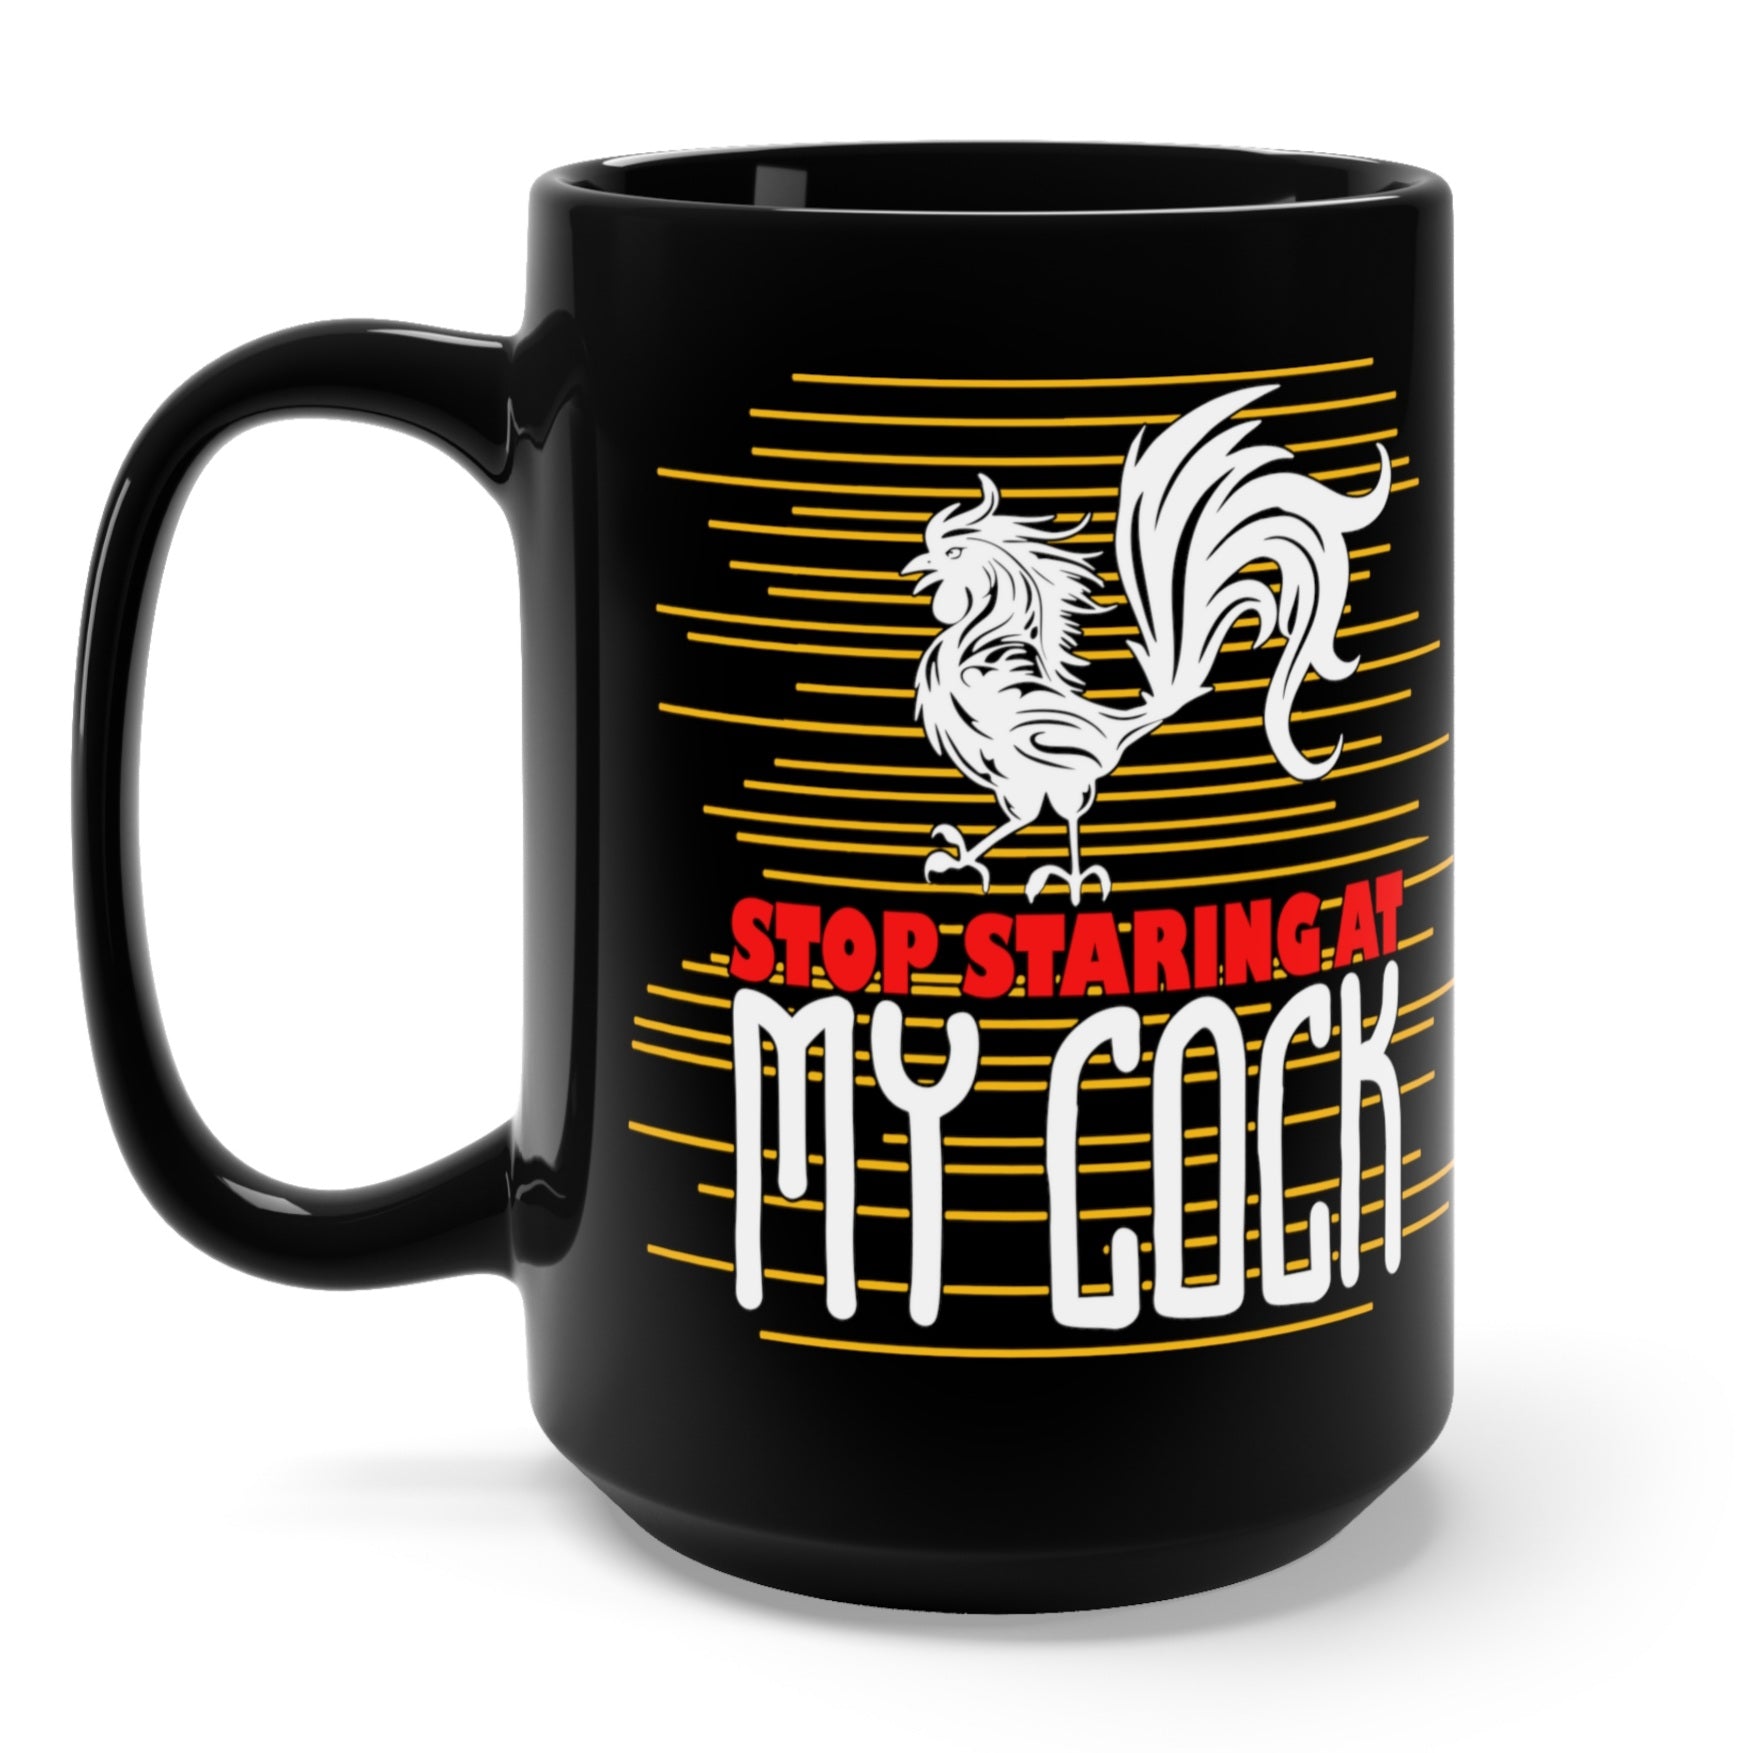 Tall black mug with picture of a rooster and text "stop staring at my cock"